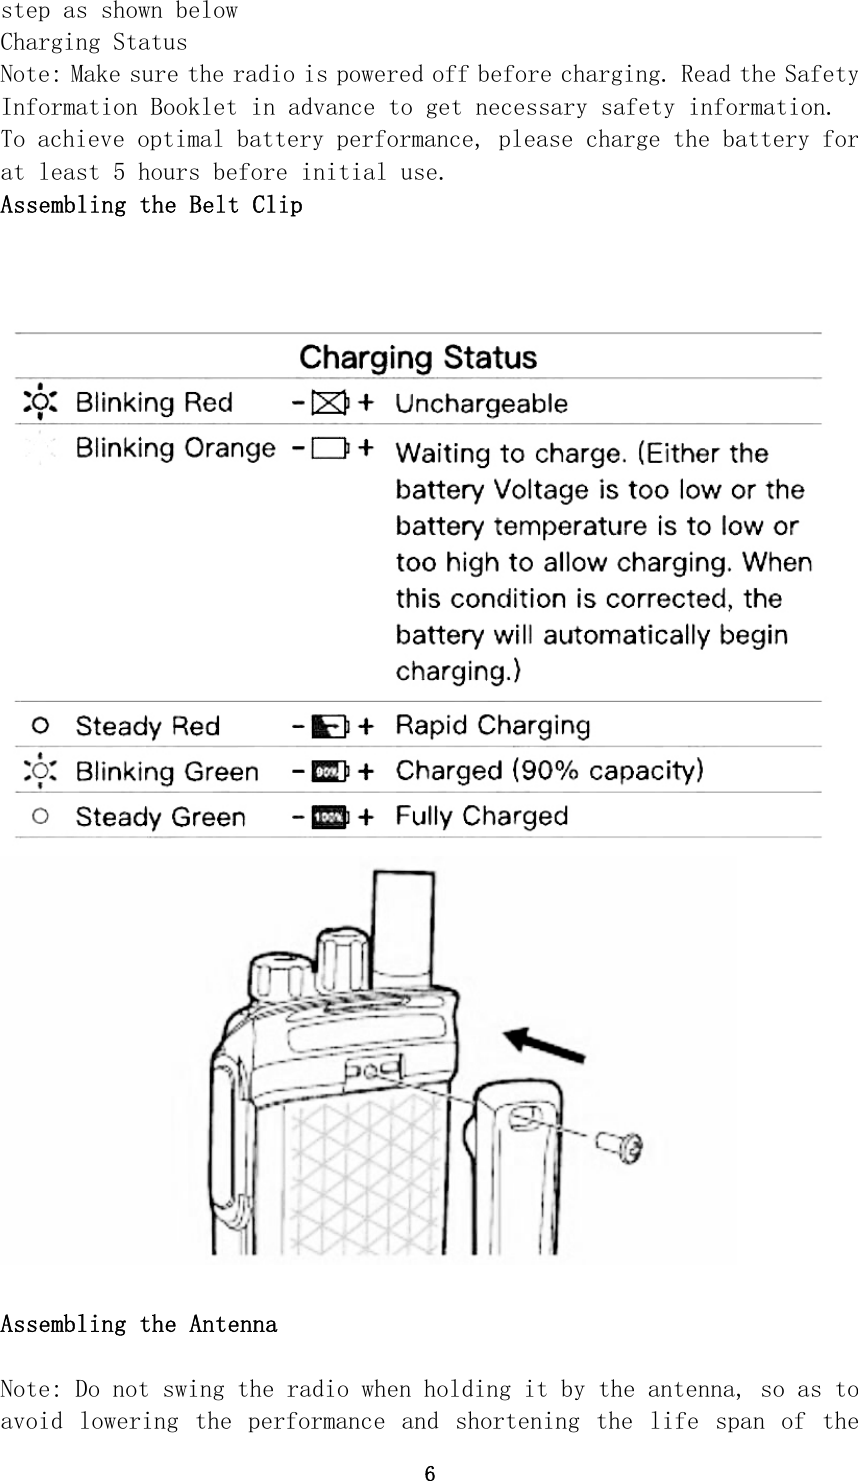 6 step as shown below Charging Status Note: Make sure the radio is powered off before charging. Read the Safety Information Booklet in advance to get necessary safety information. To achieve optimal battery performance, please charge the battery for at least 5 hours before initial use. Assembling the Belt Clip   Assembling the Antenna  Note: Do not swing the radio when holding it by the antenna, so as to avoid  lowering  the  performance  and  shortening  the  life  span  of  the 